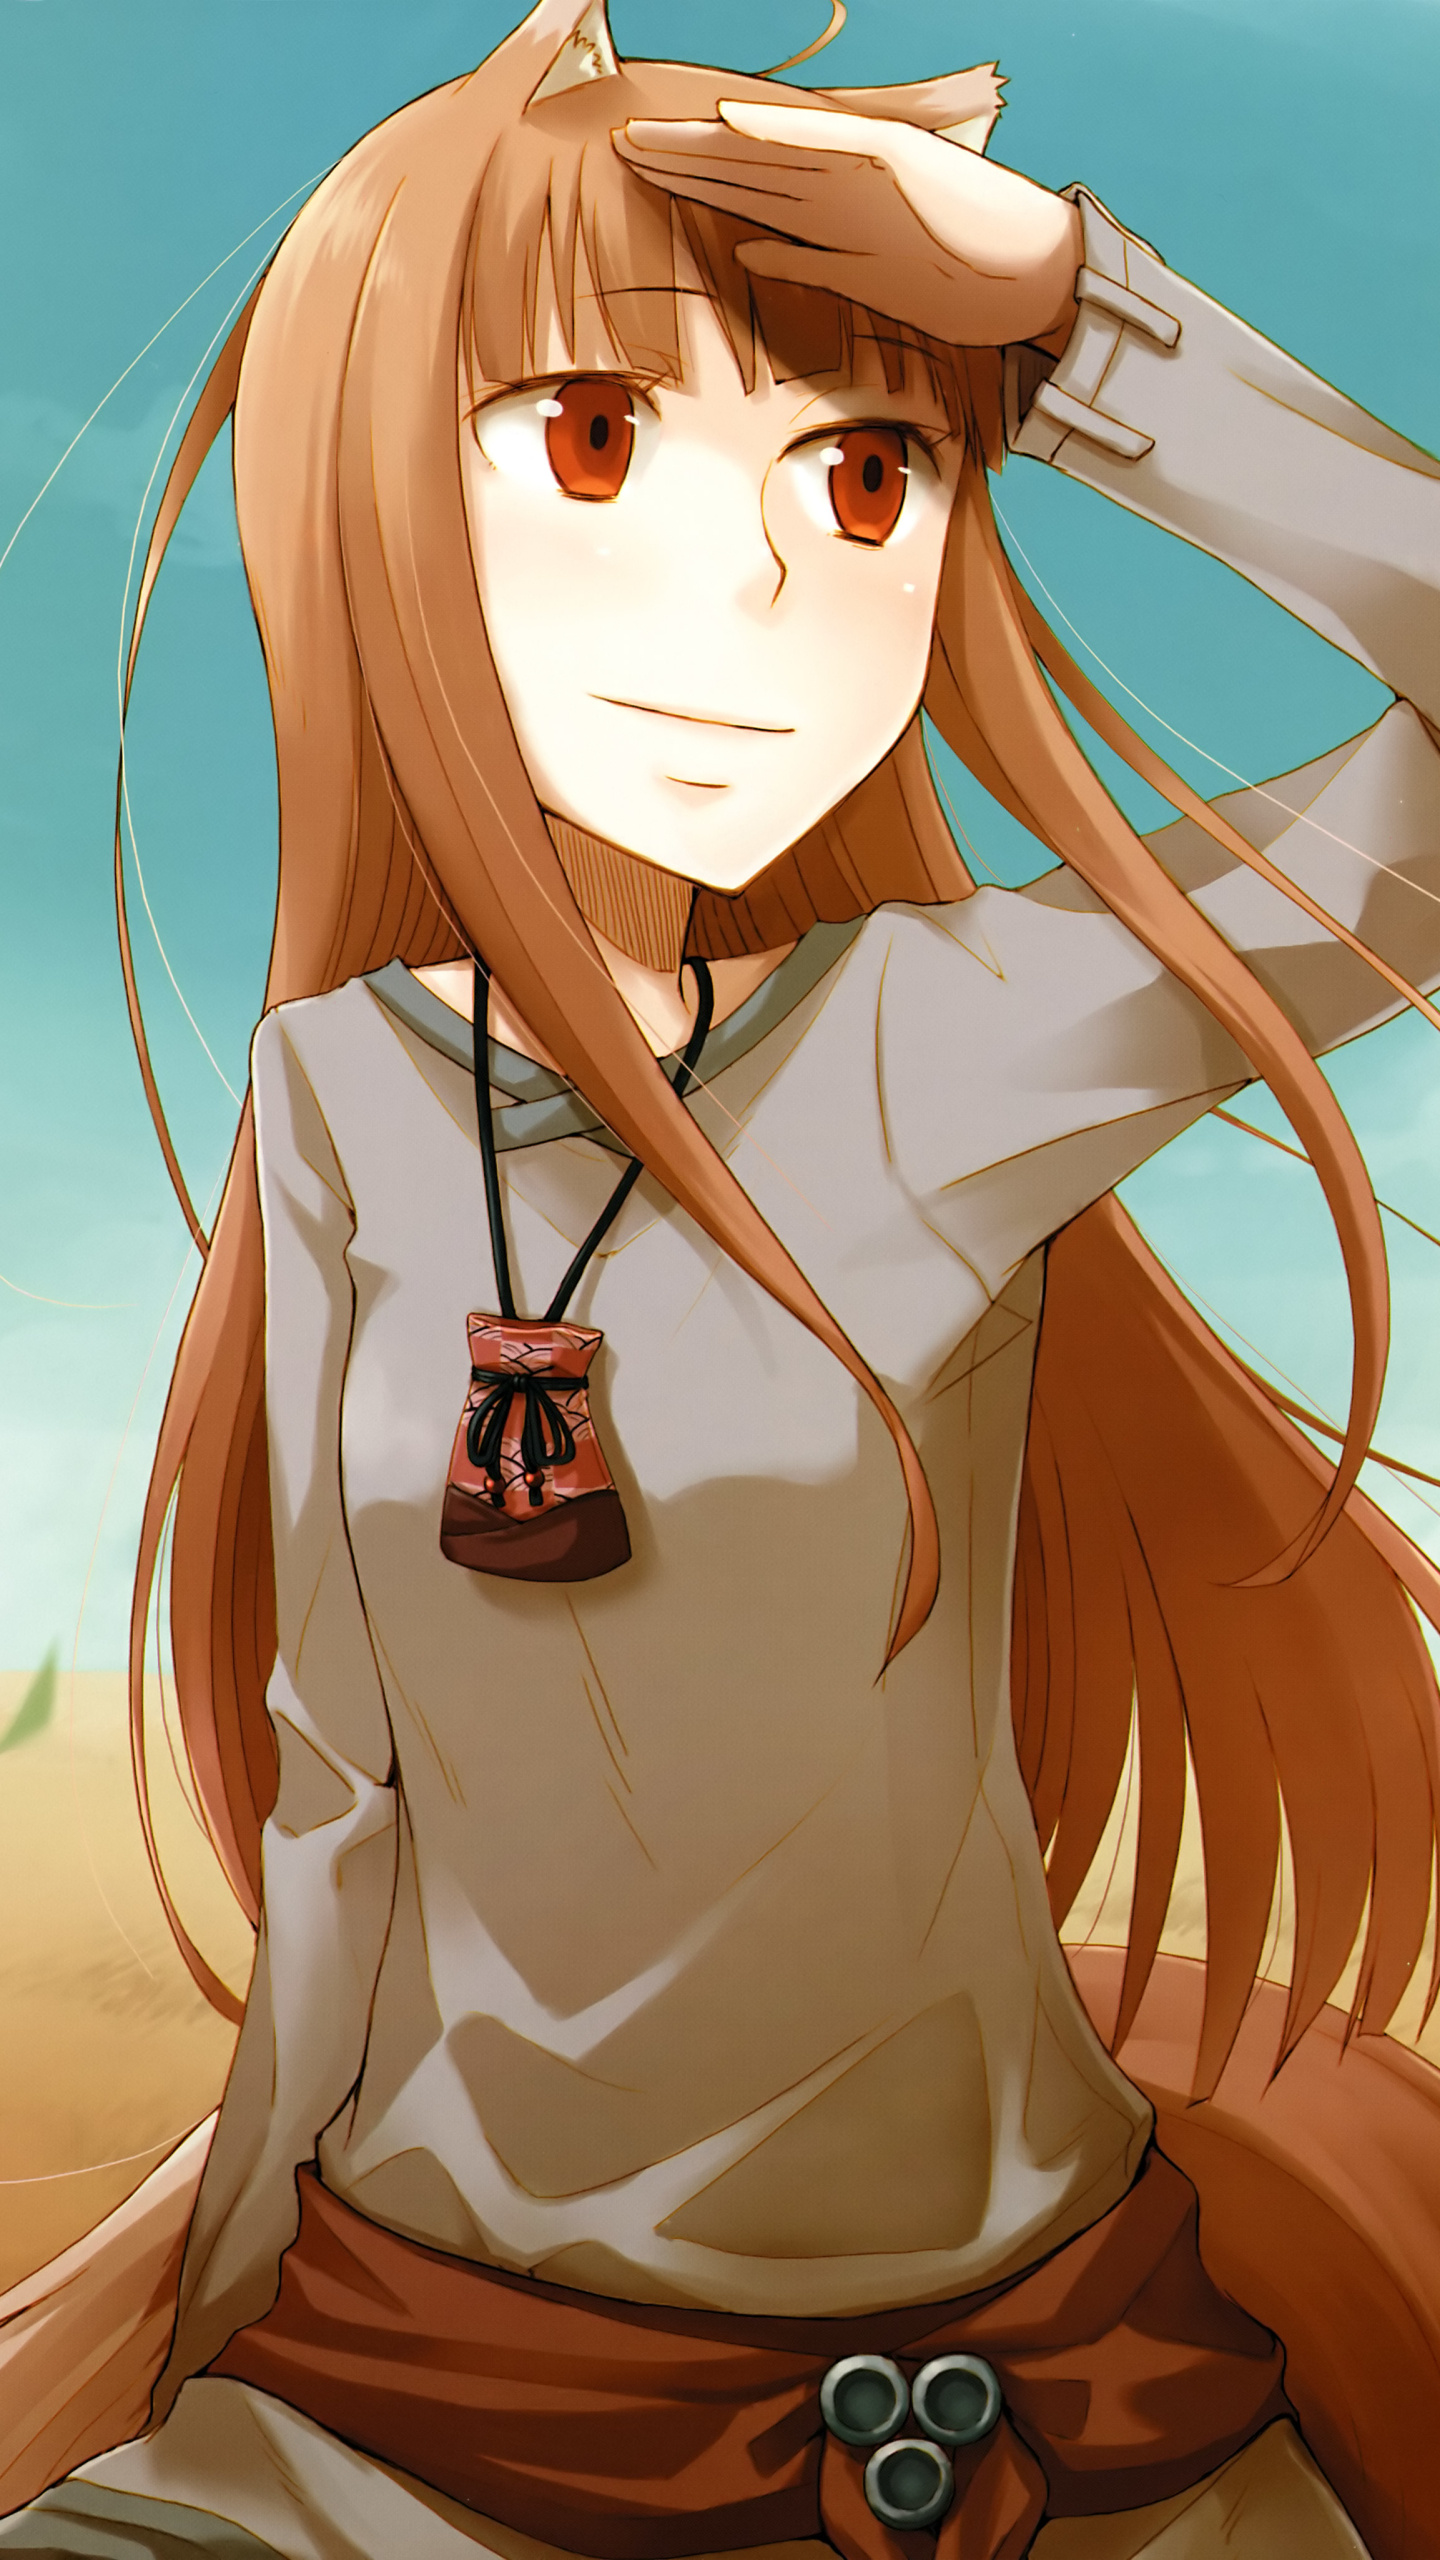 Spice and Wolf (Anime): Holo, A pair of wolf ears, Human form. 1440x2560 HD Wallpaper.